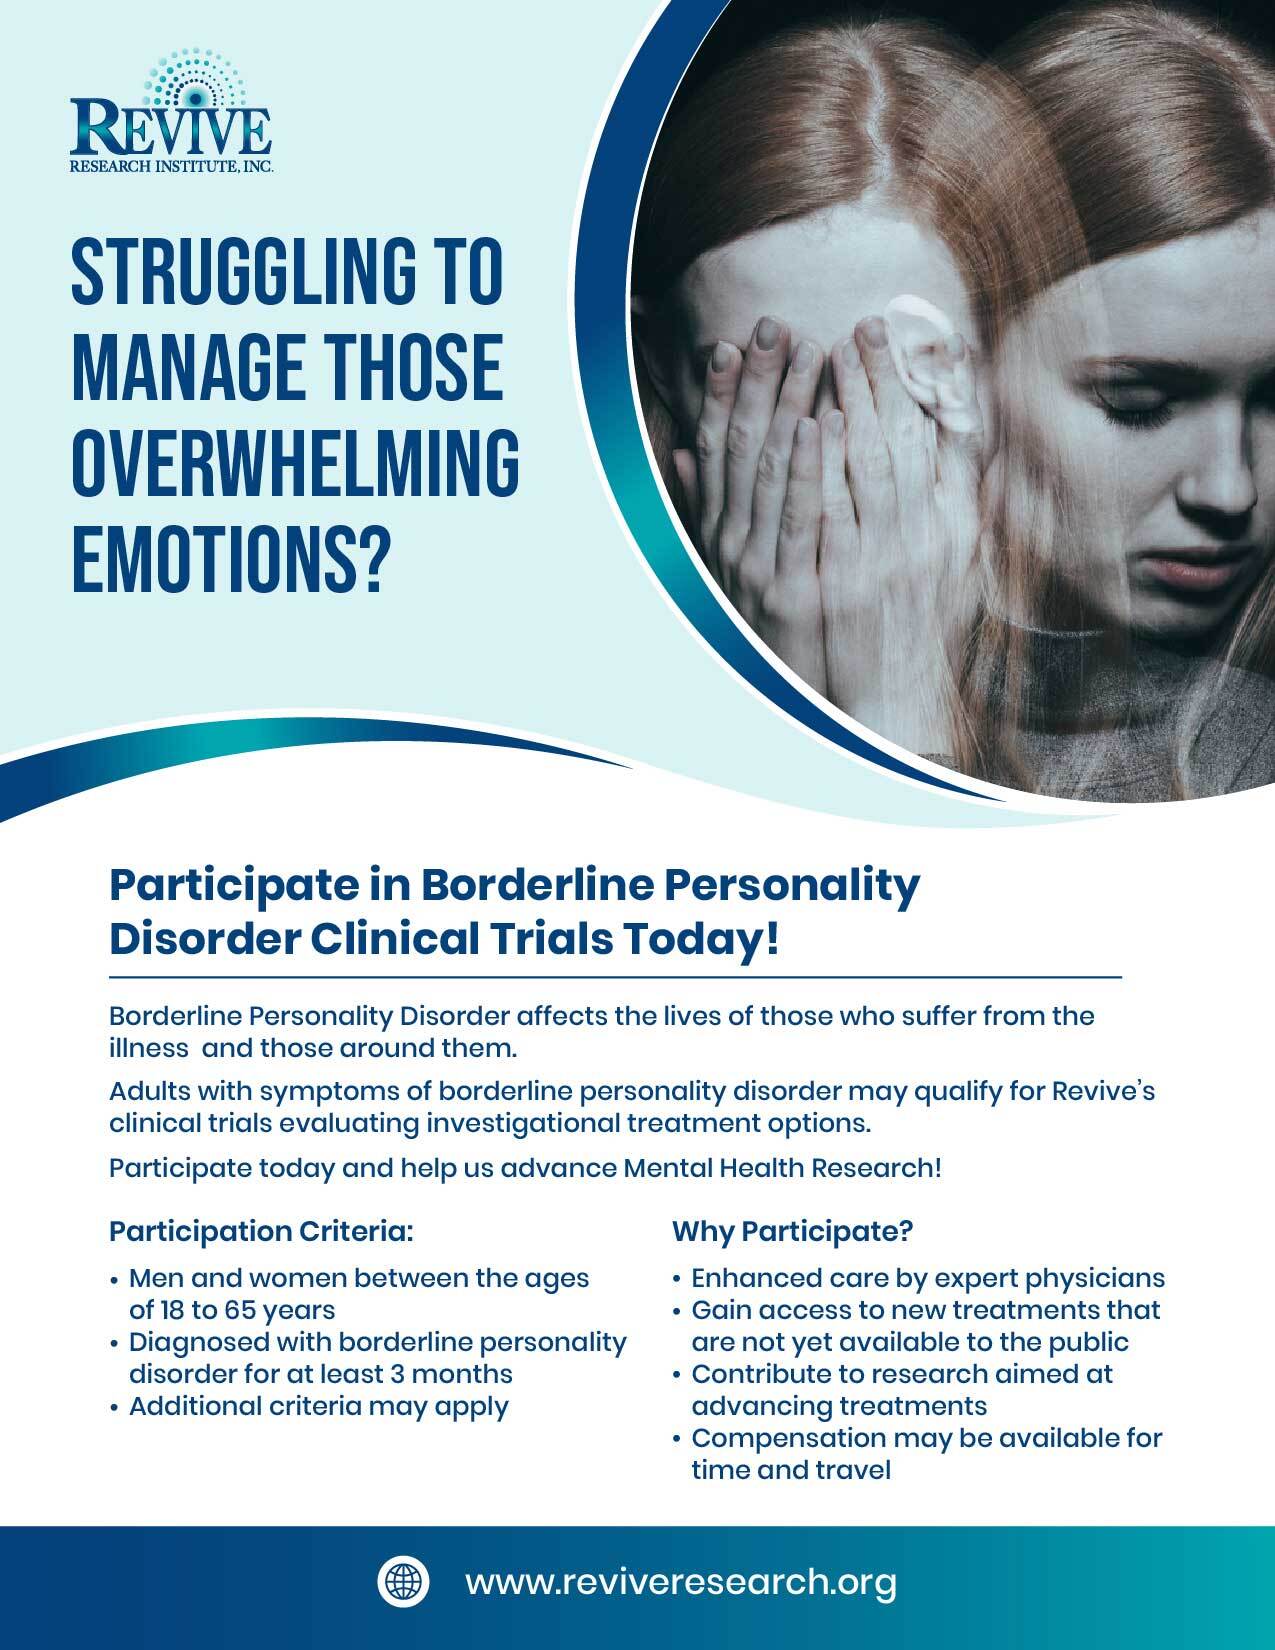 Borderline Personality Disorder Clinical Trials flyer